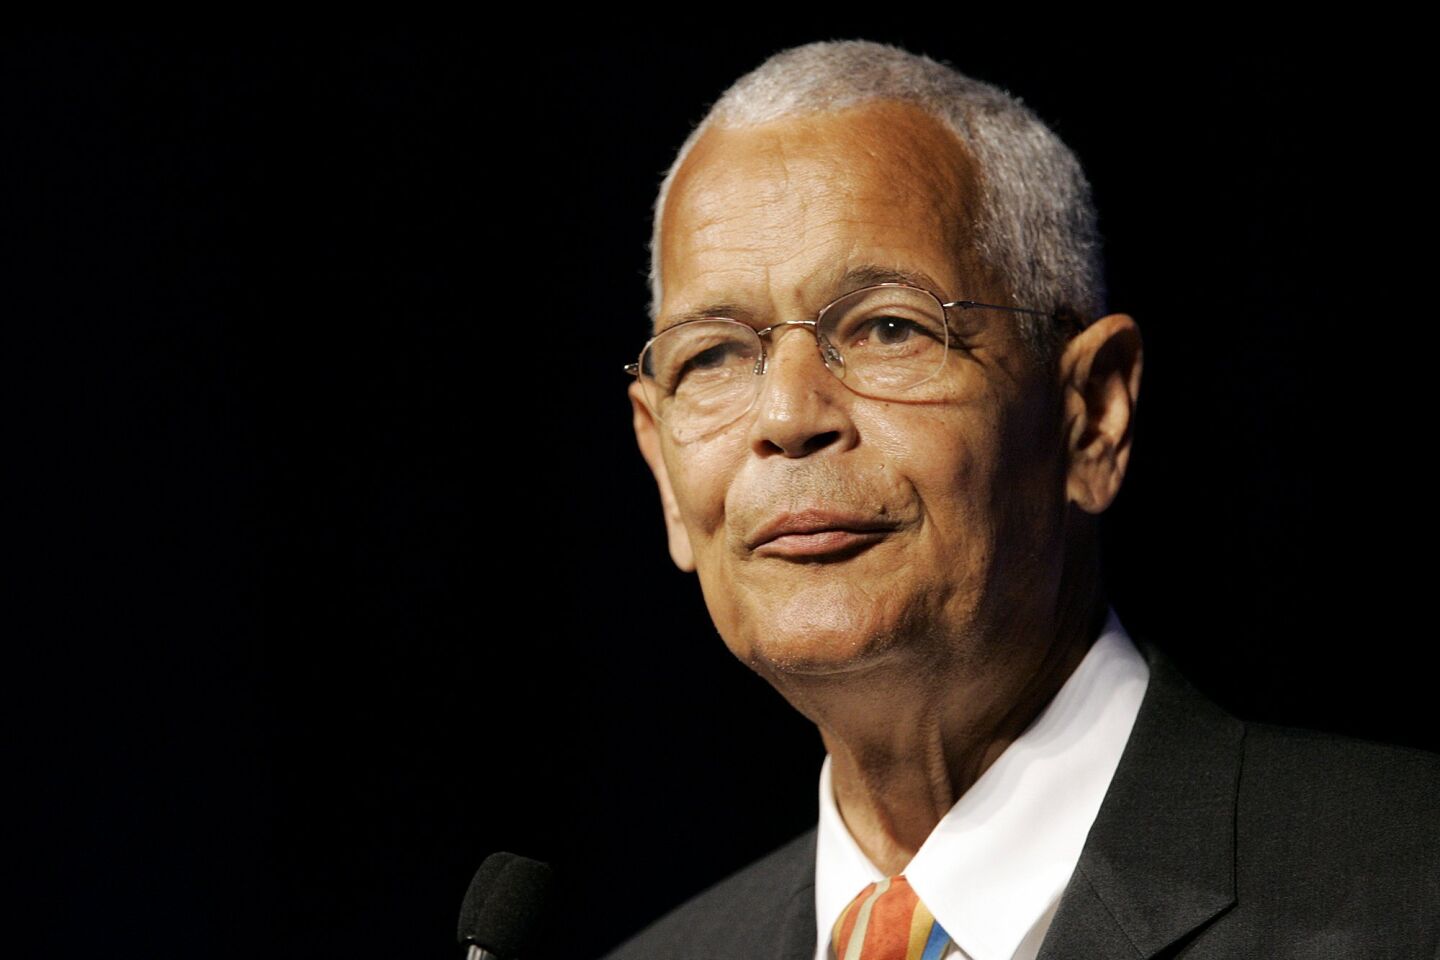 Charismatic and eloquent, the civil rights leader had numerous key accomplishments, including co-founding the landmark Student Nonviolent Coordinating Committee and serving as board chairman of the NAACP. He was 75. Full obituary